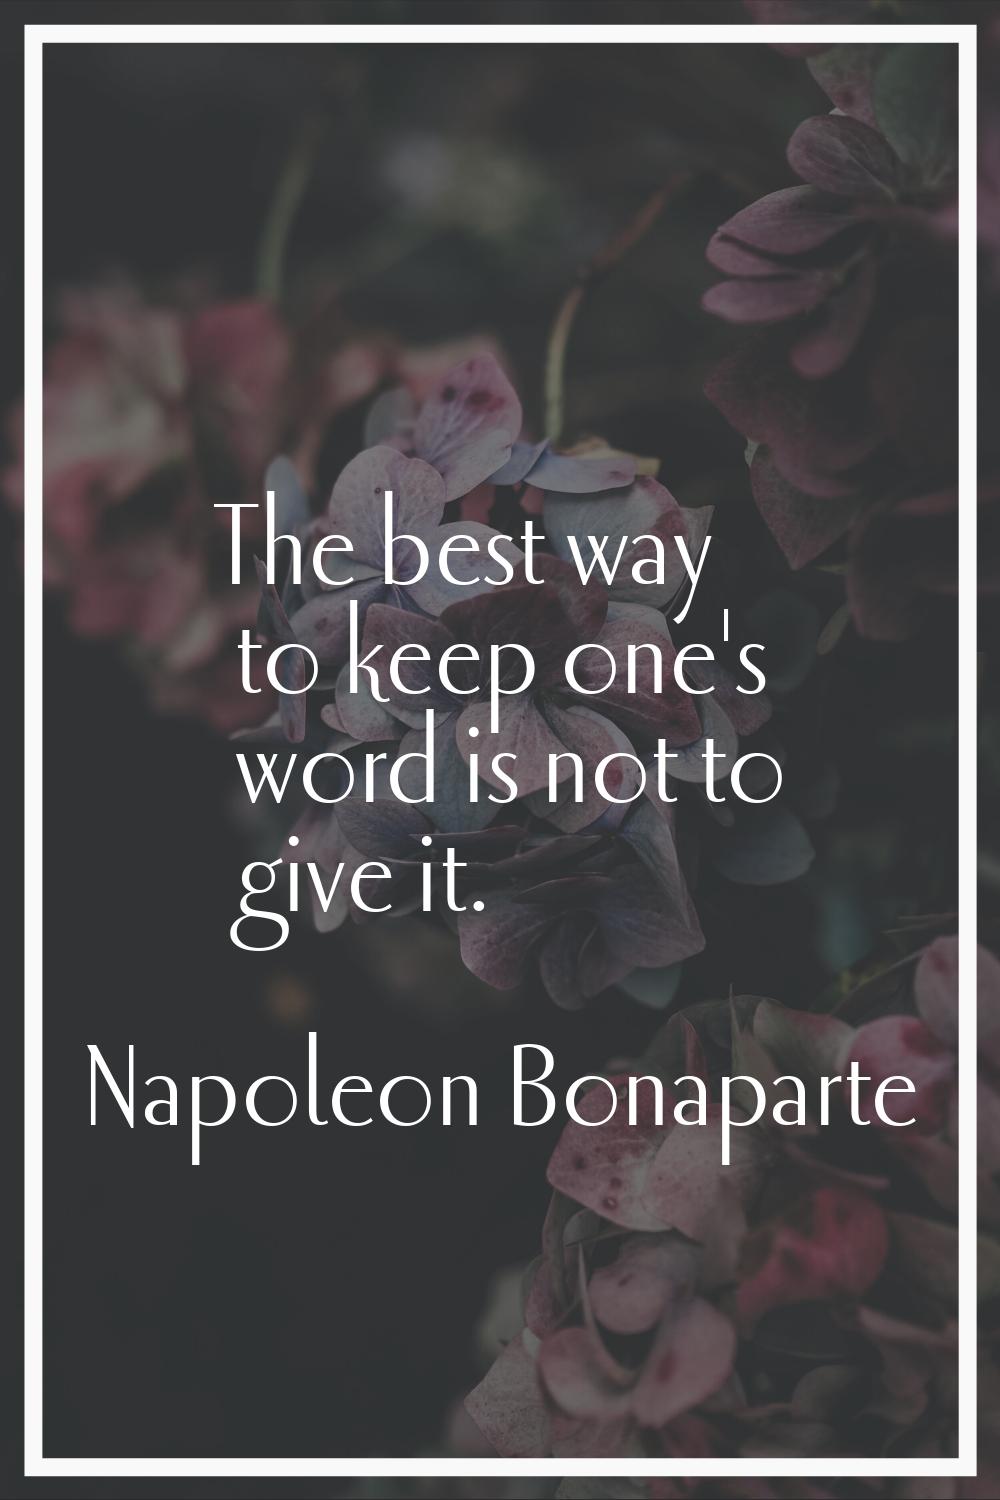 The best way to keep one's word is not to give it.